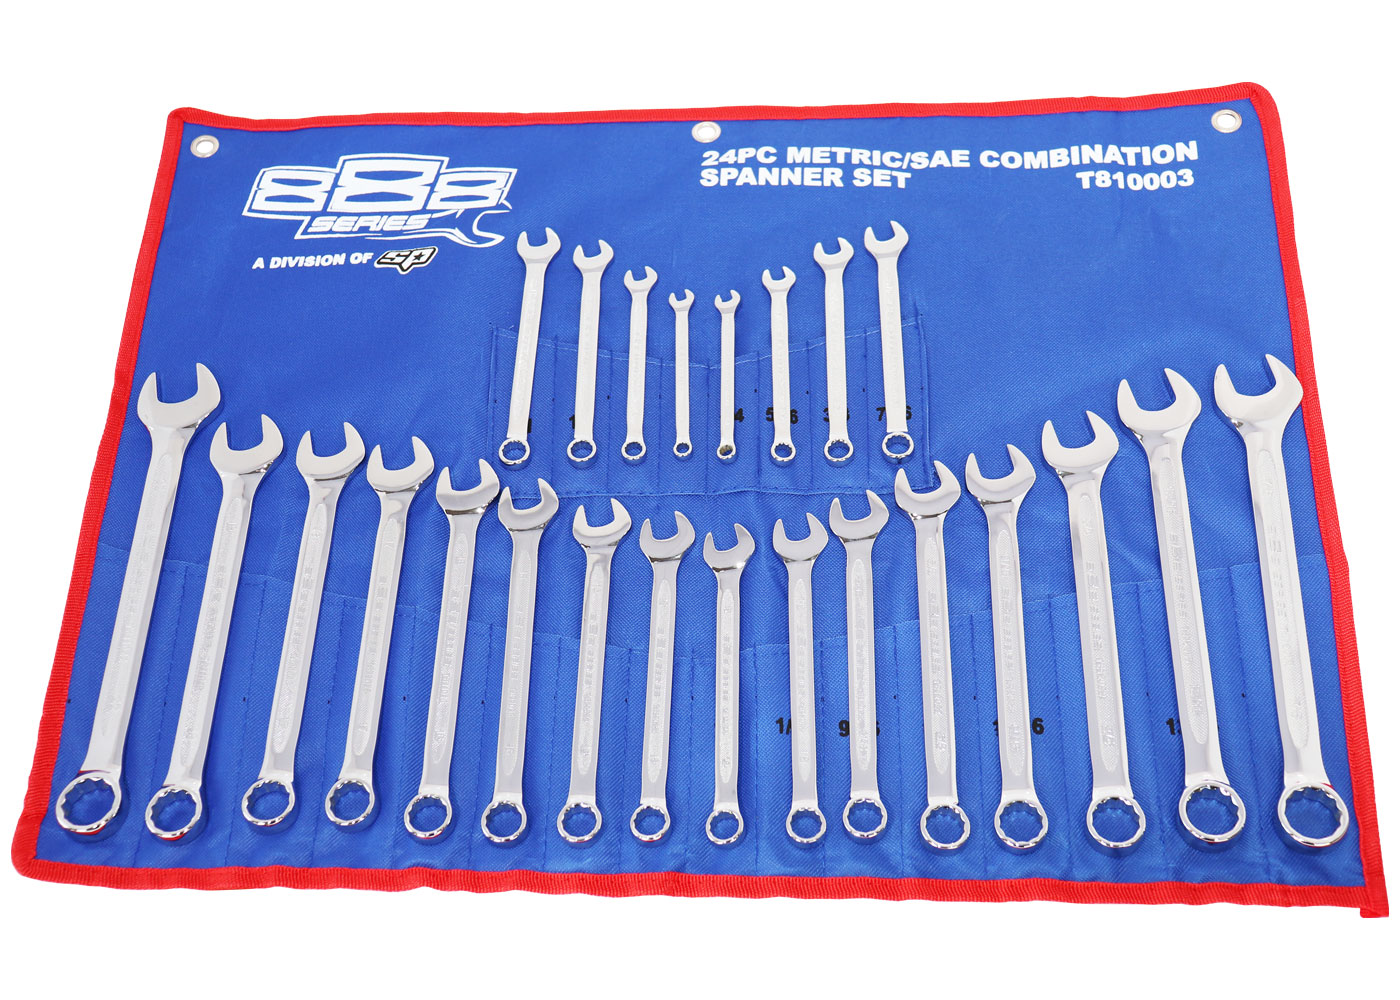 Combination Roe Spanner Set Metric/Sae 24Pce  - T810003 by SP Tools